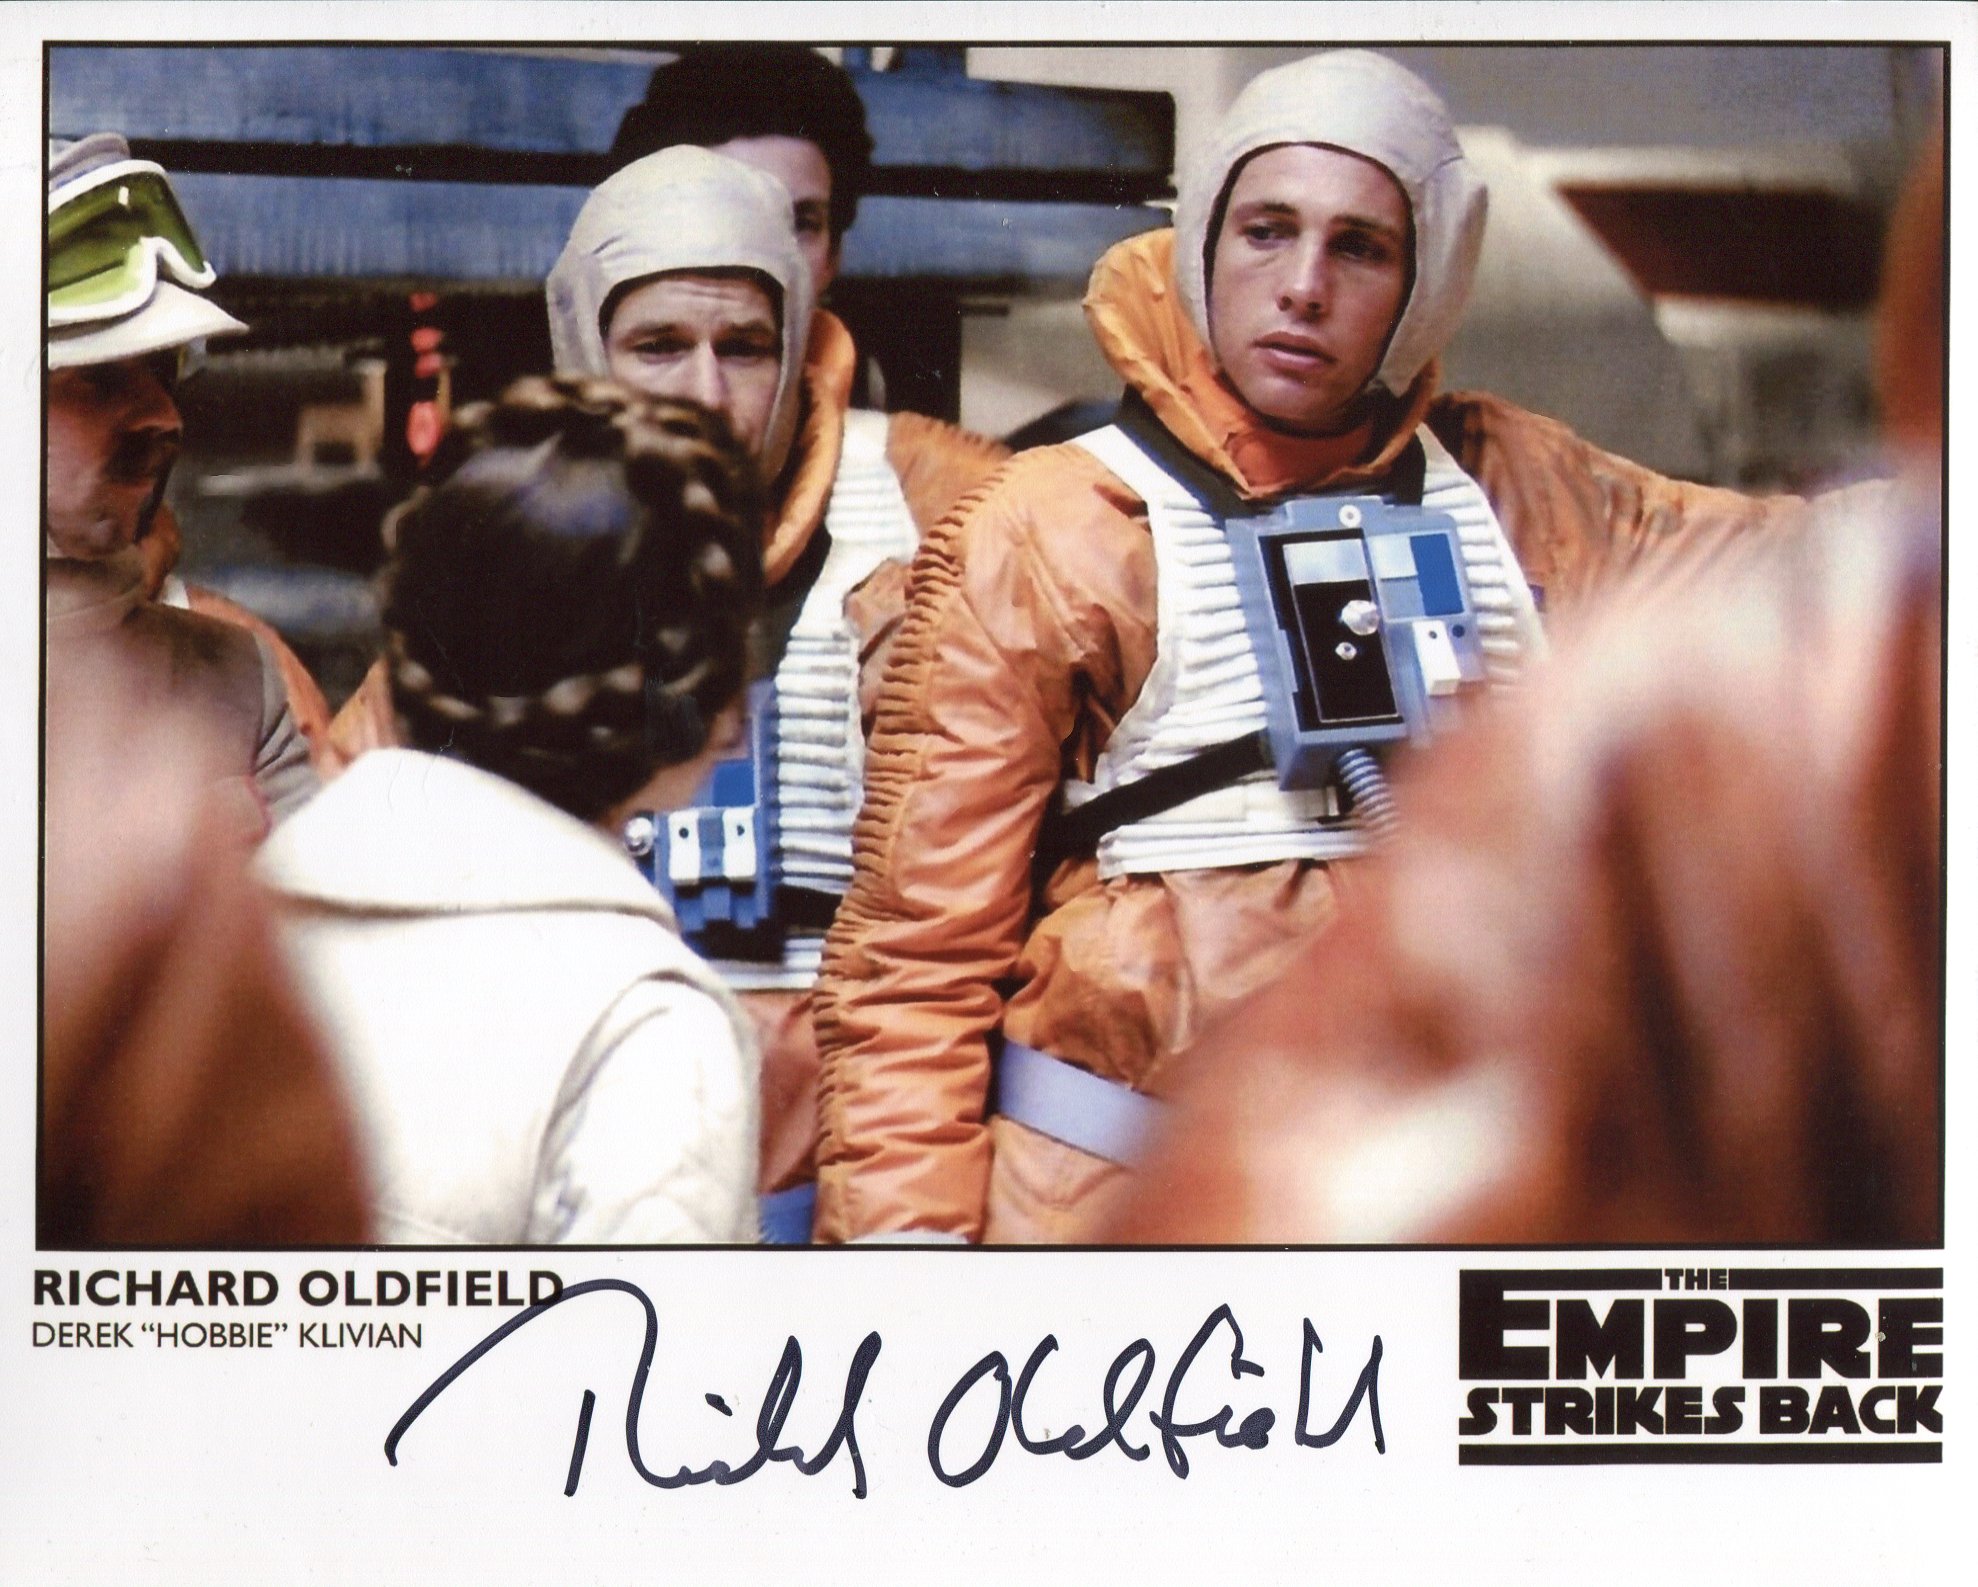 Star Wars 8x10 Empire Strikes Back photo signed by Richard Oldfield as Hobbie. Good condition. All